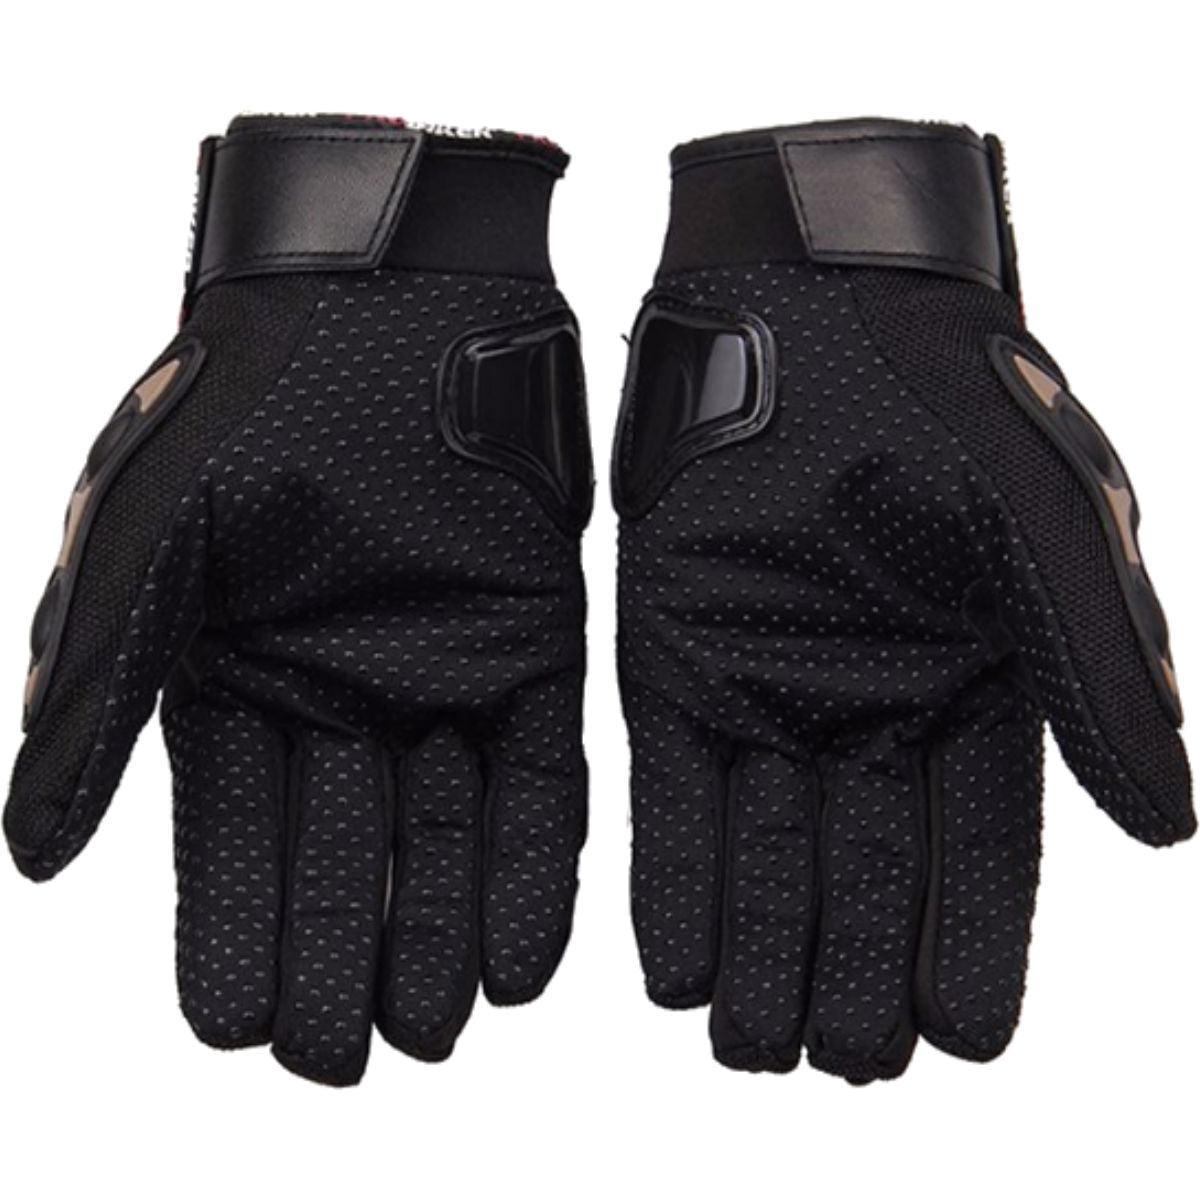 A pair of Alr™ Pro-Biker Series Waterproof Motorcycle Gloves on a white background.